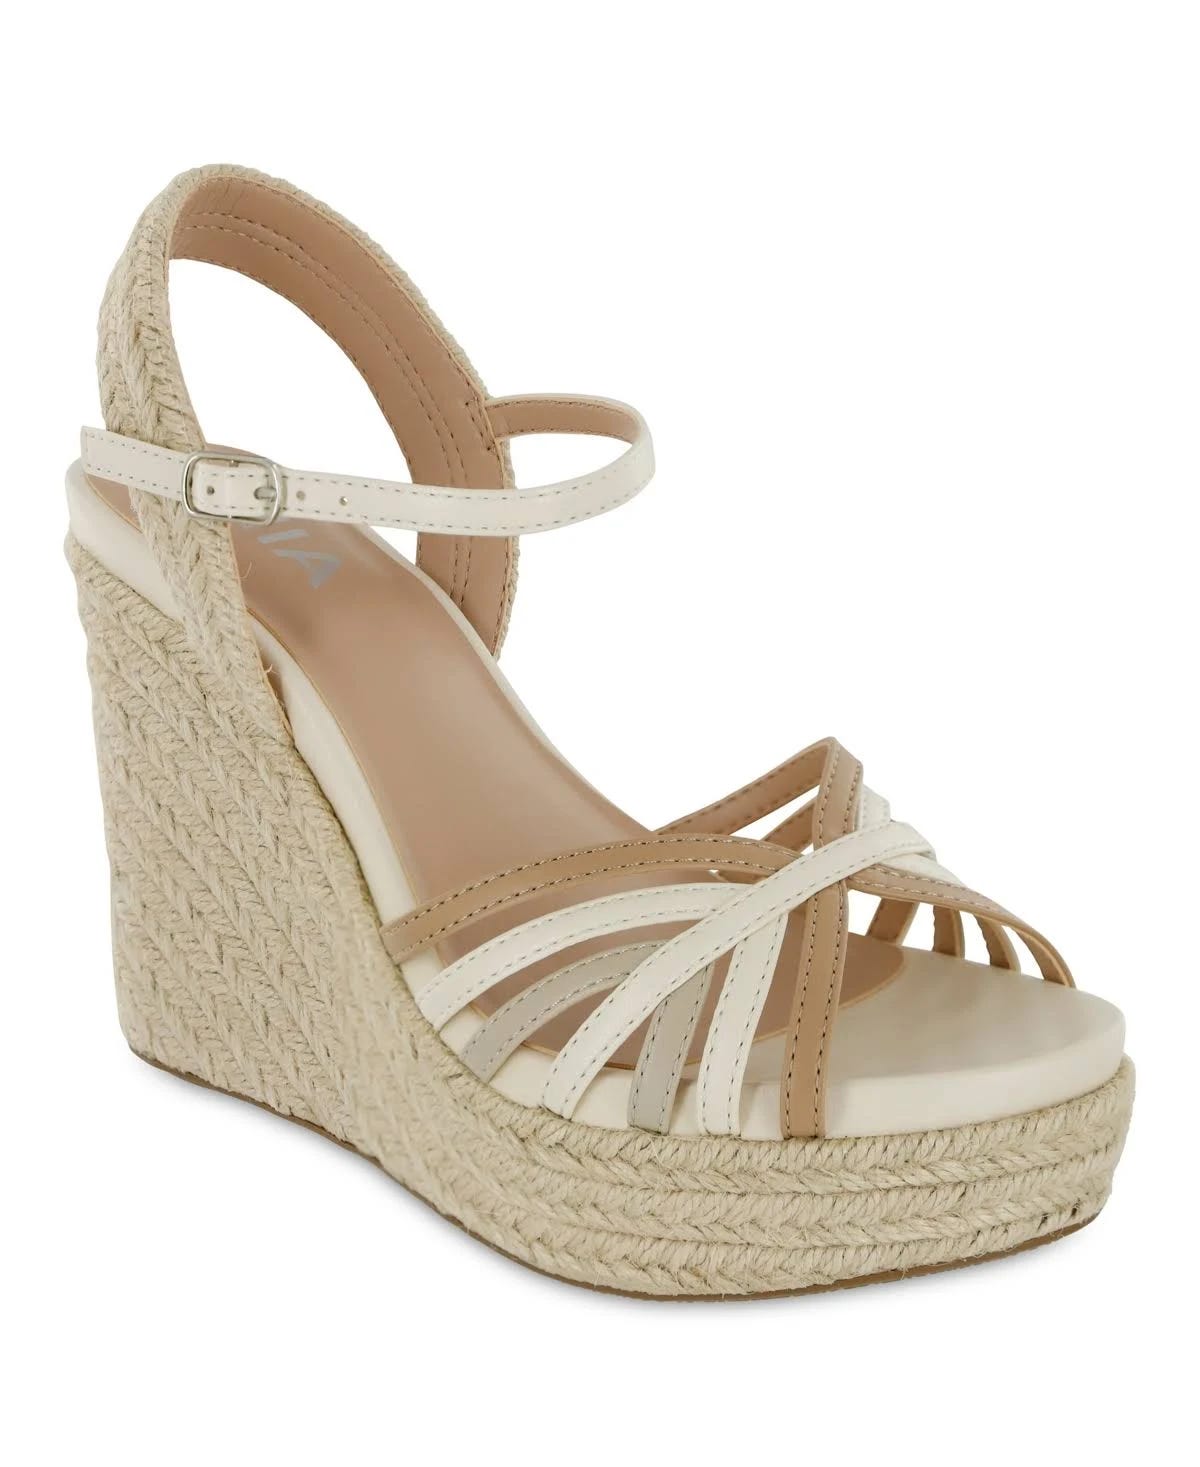 Stylish Anjalli Women's Wedge Sandals with Heel Lift and Buckle Closure | Image